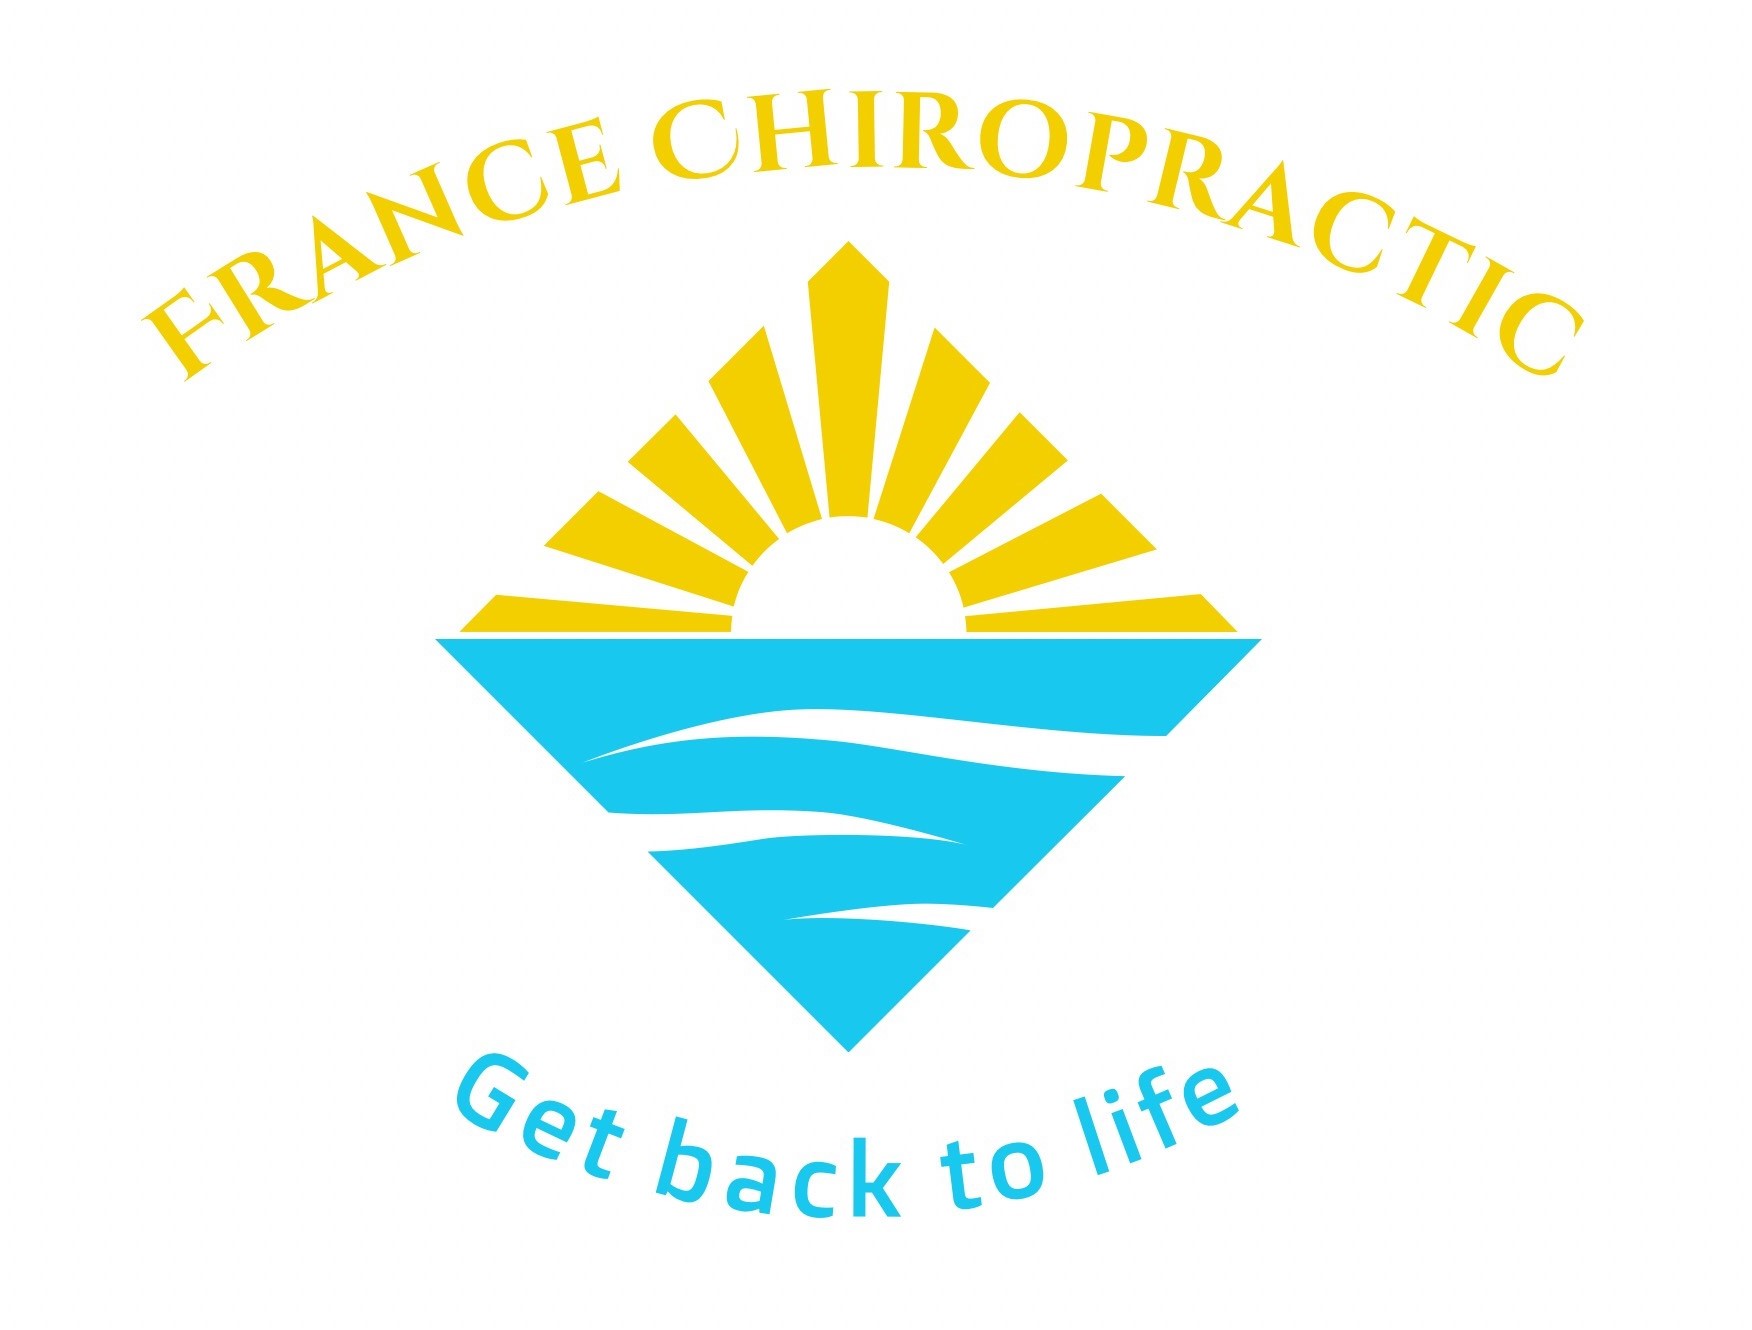 France Chiropractic